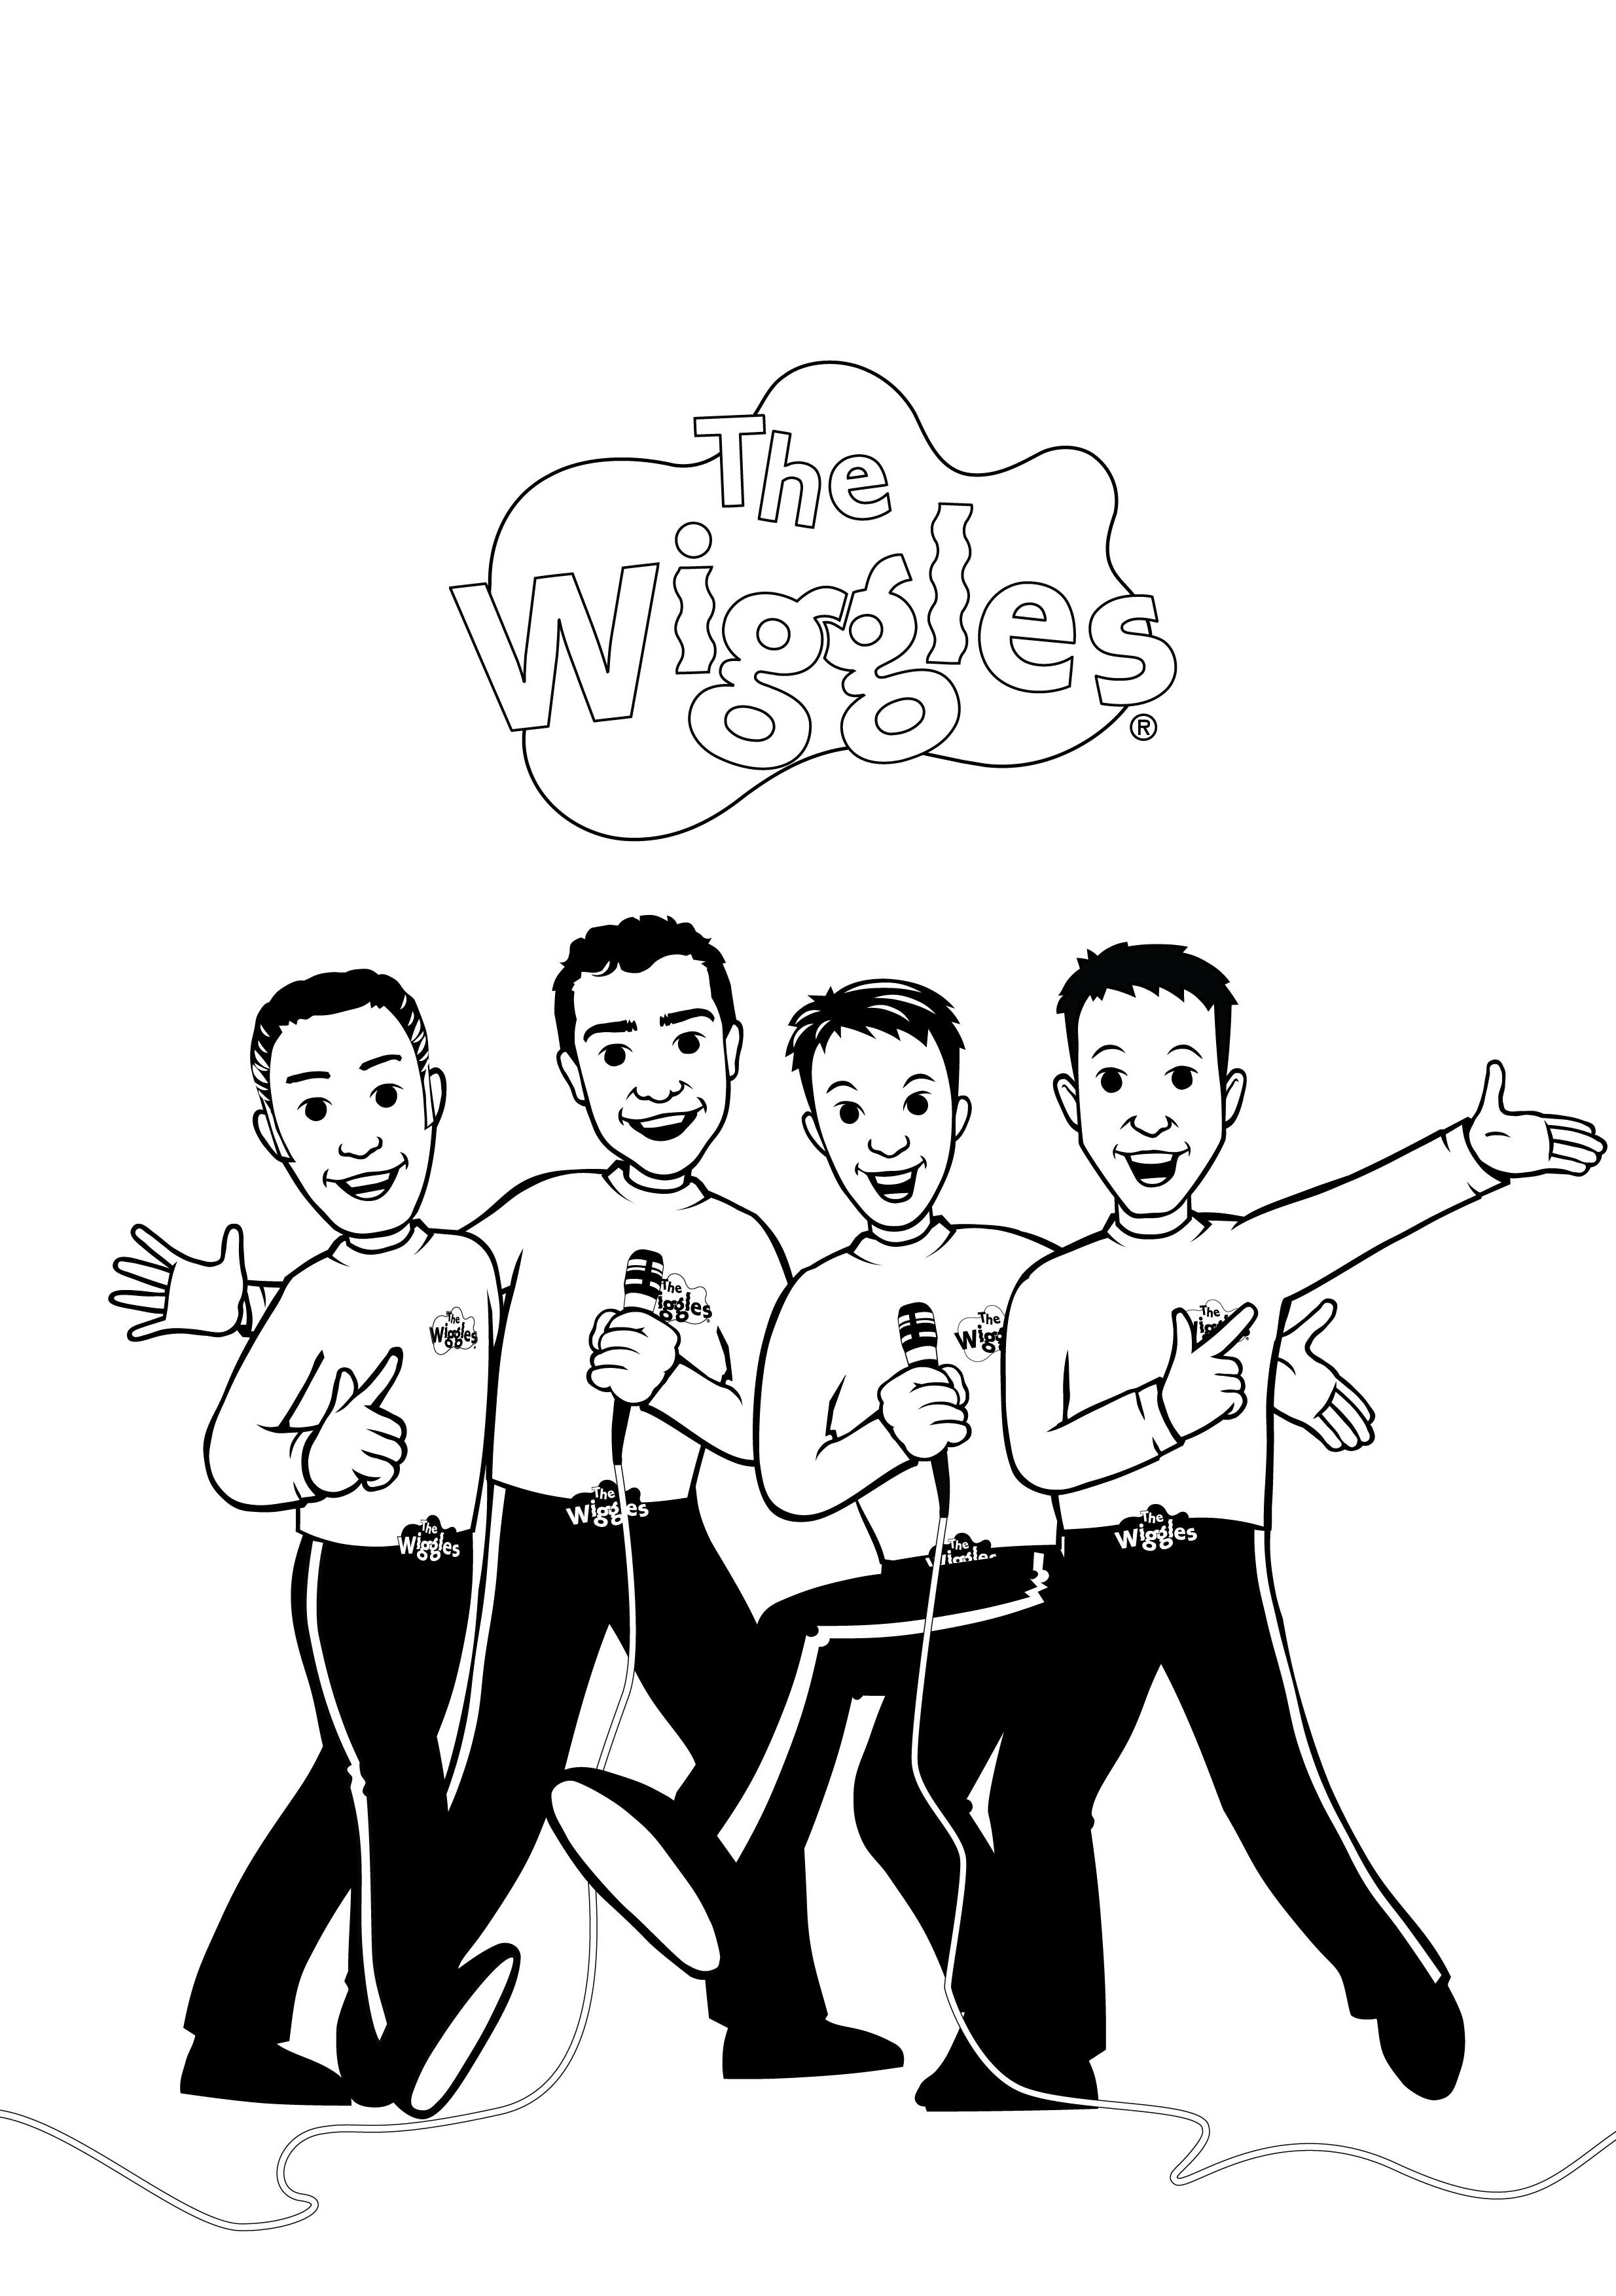 Wiggles Colouring Pages at GetColorings.com | Free printable colorings